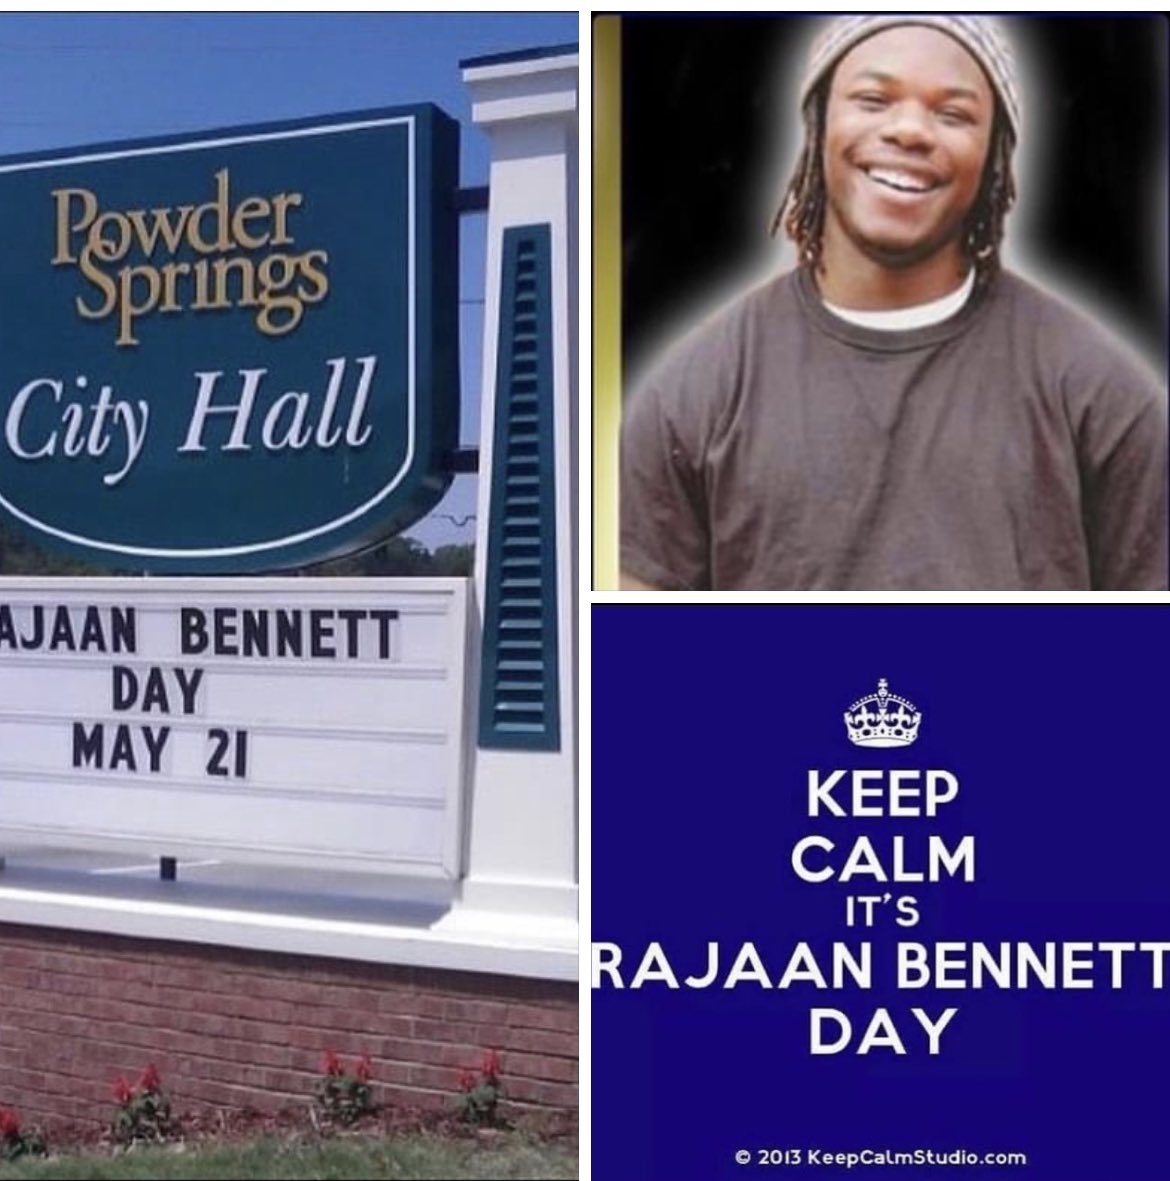 Happy Rajaan Bennett day to all those Powder Springs folks past and present. May you have a Blessed day! If you do not know about this young man, ask someone and find out! Especially those of who are MHS students or parents. ❤️ #blueandgold.  #prideinthetribe